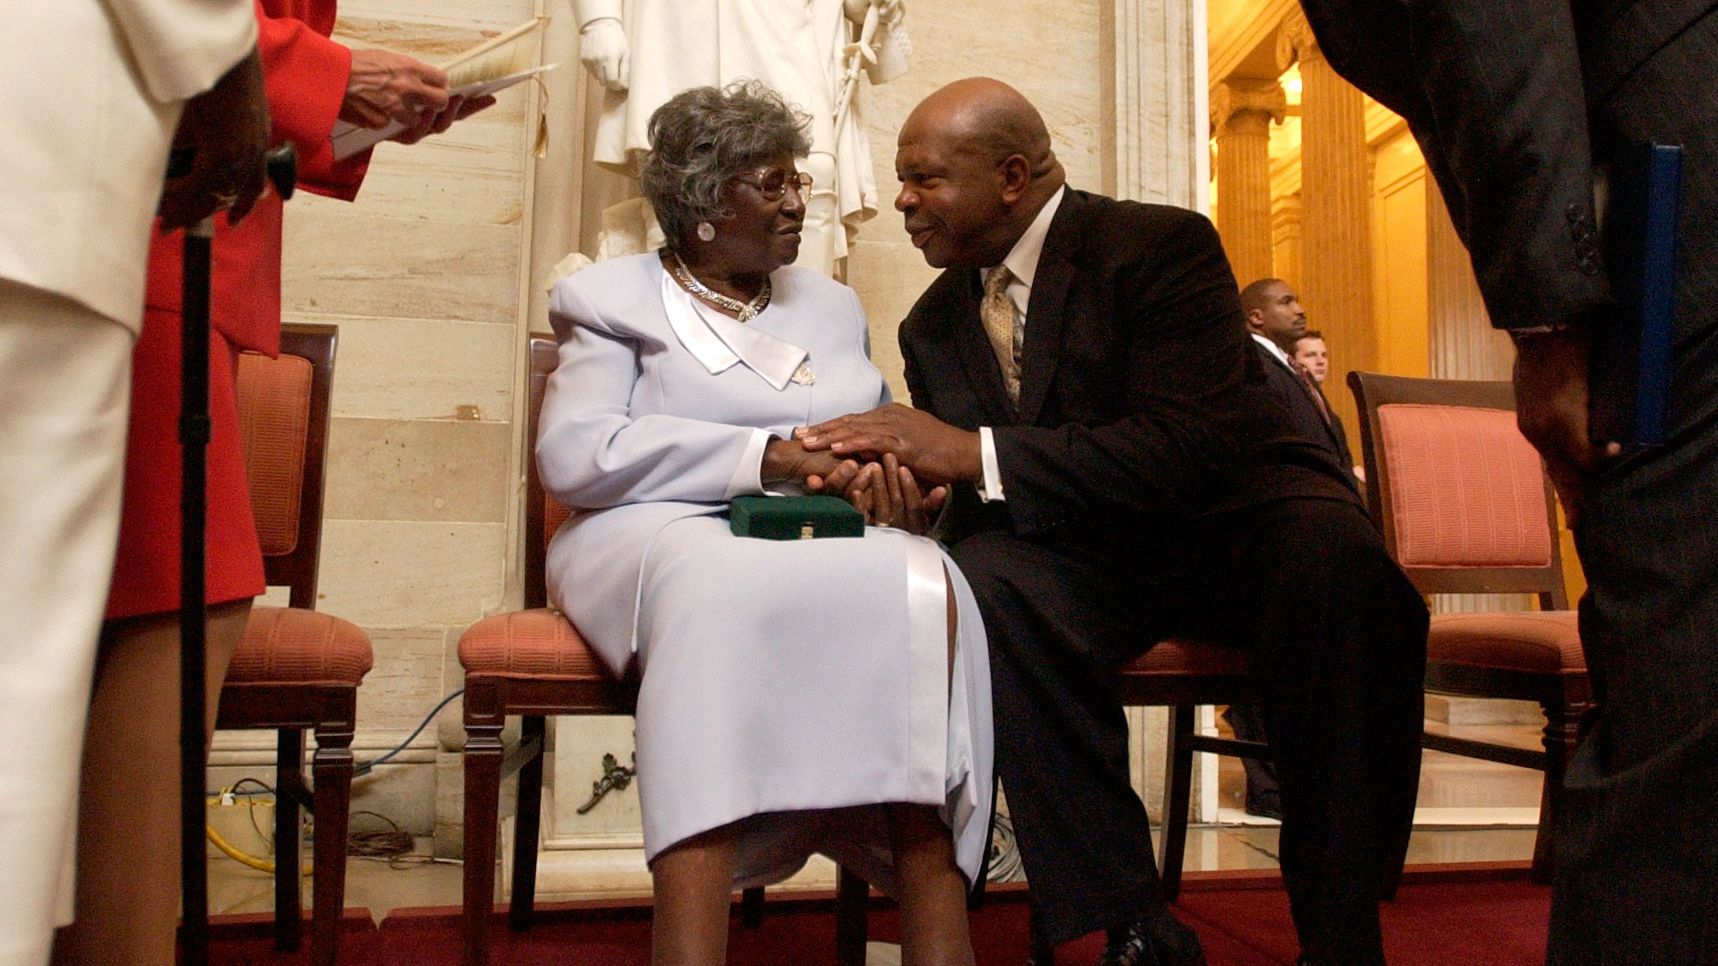 Viola Pearson, the widow of Levi Pearson, talks with Cummings after a ceremony honoring her husband with the Congressional Gold Medal in September 2004. Levi Pearson was among four people honored for their involvement in Briggs v. Elliott, a court case that challenged segregation in South Carolina schools.